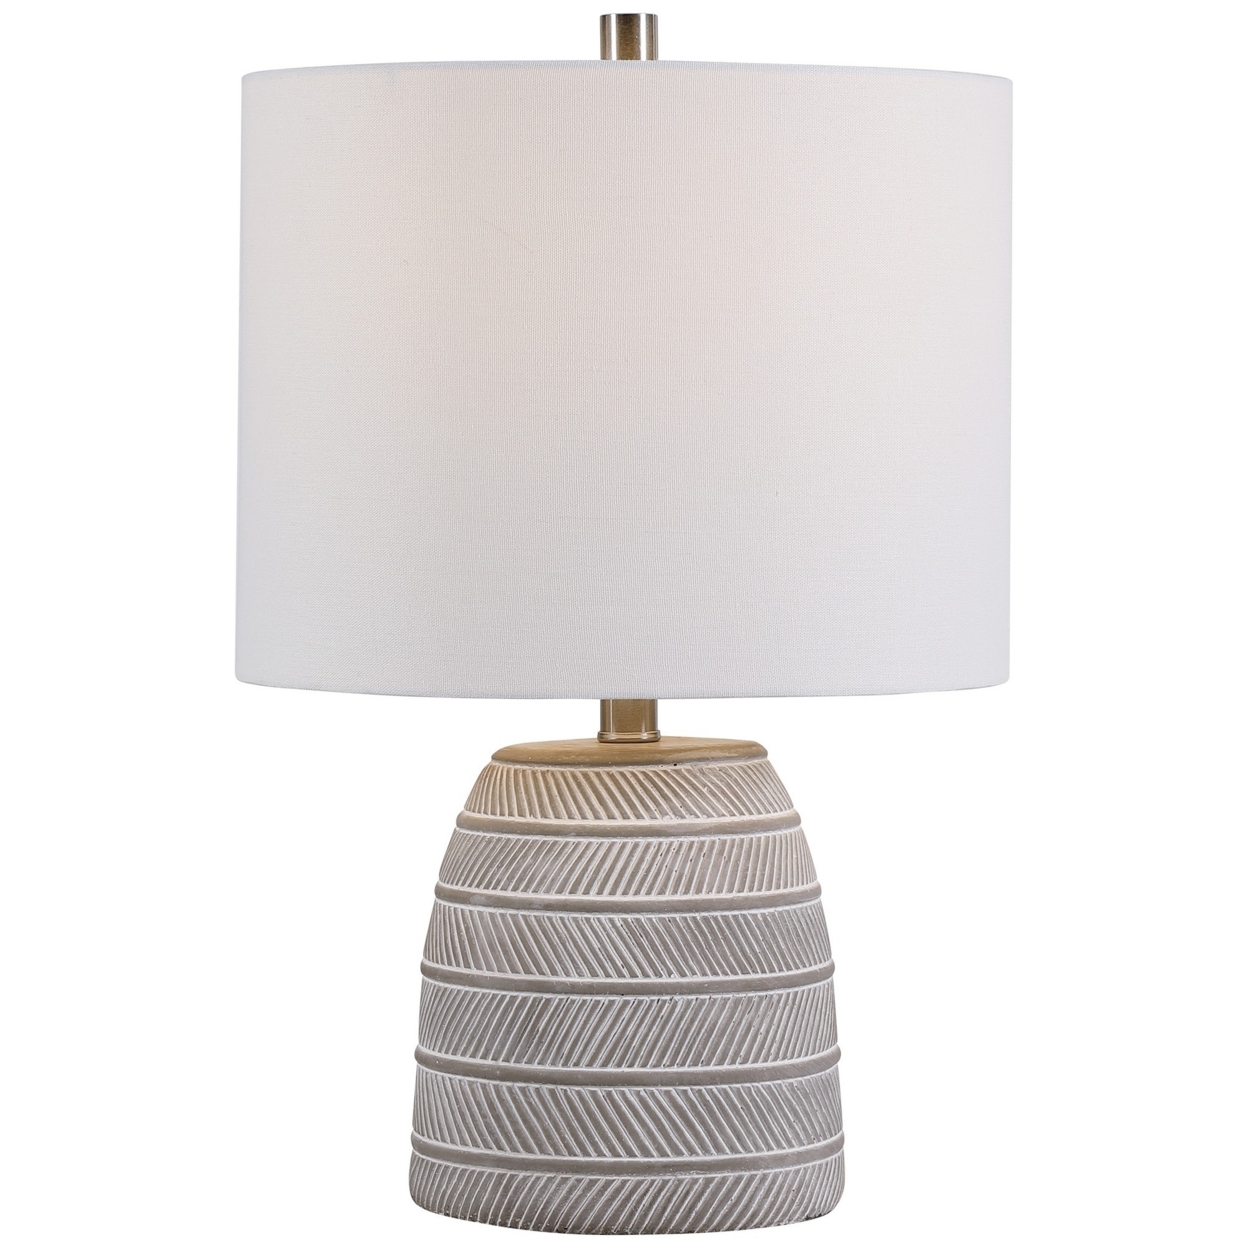 Concrete Bellied Shape Table Lamp with Textured Lines, Gray- Saltoro Sherpi